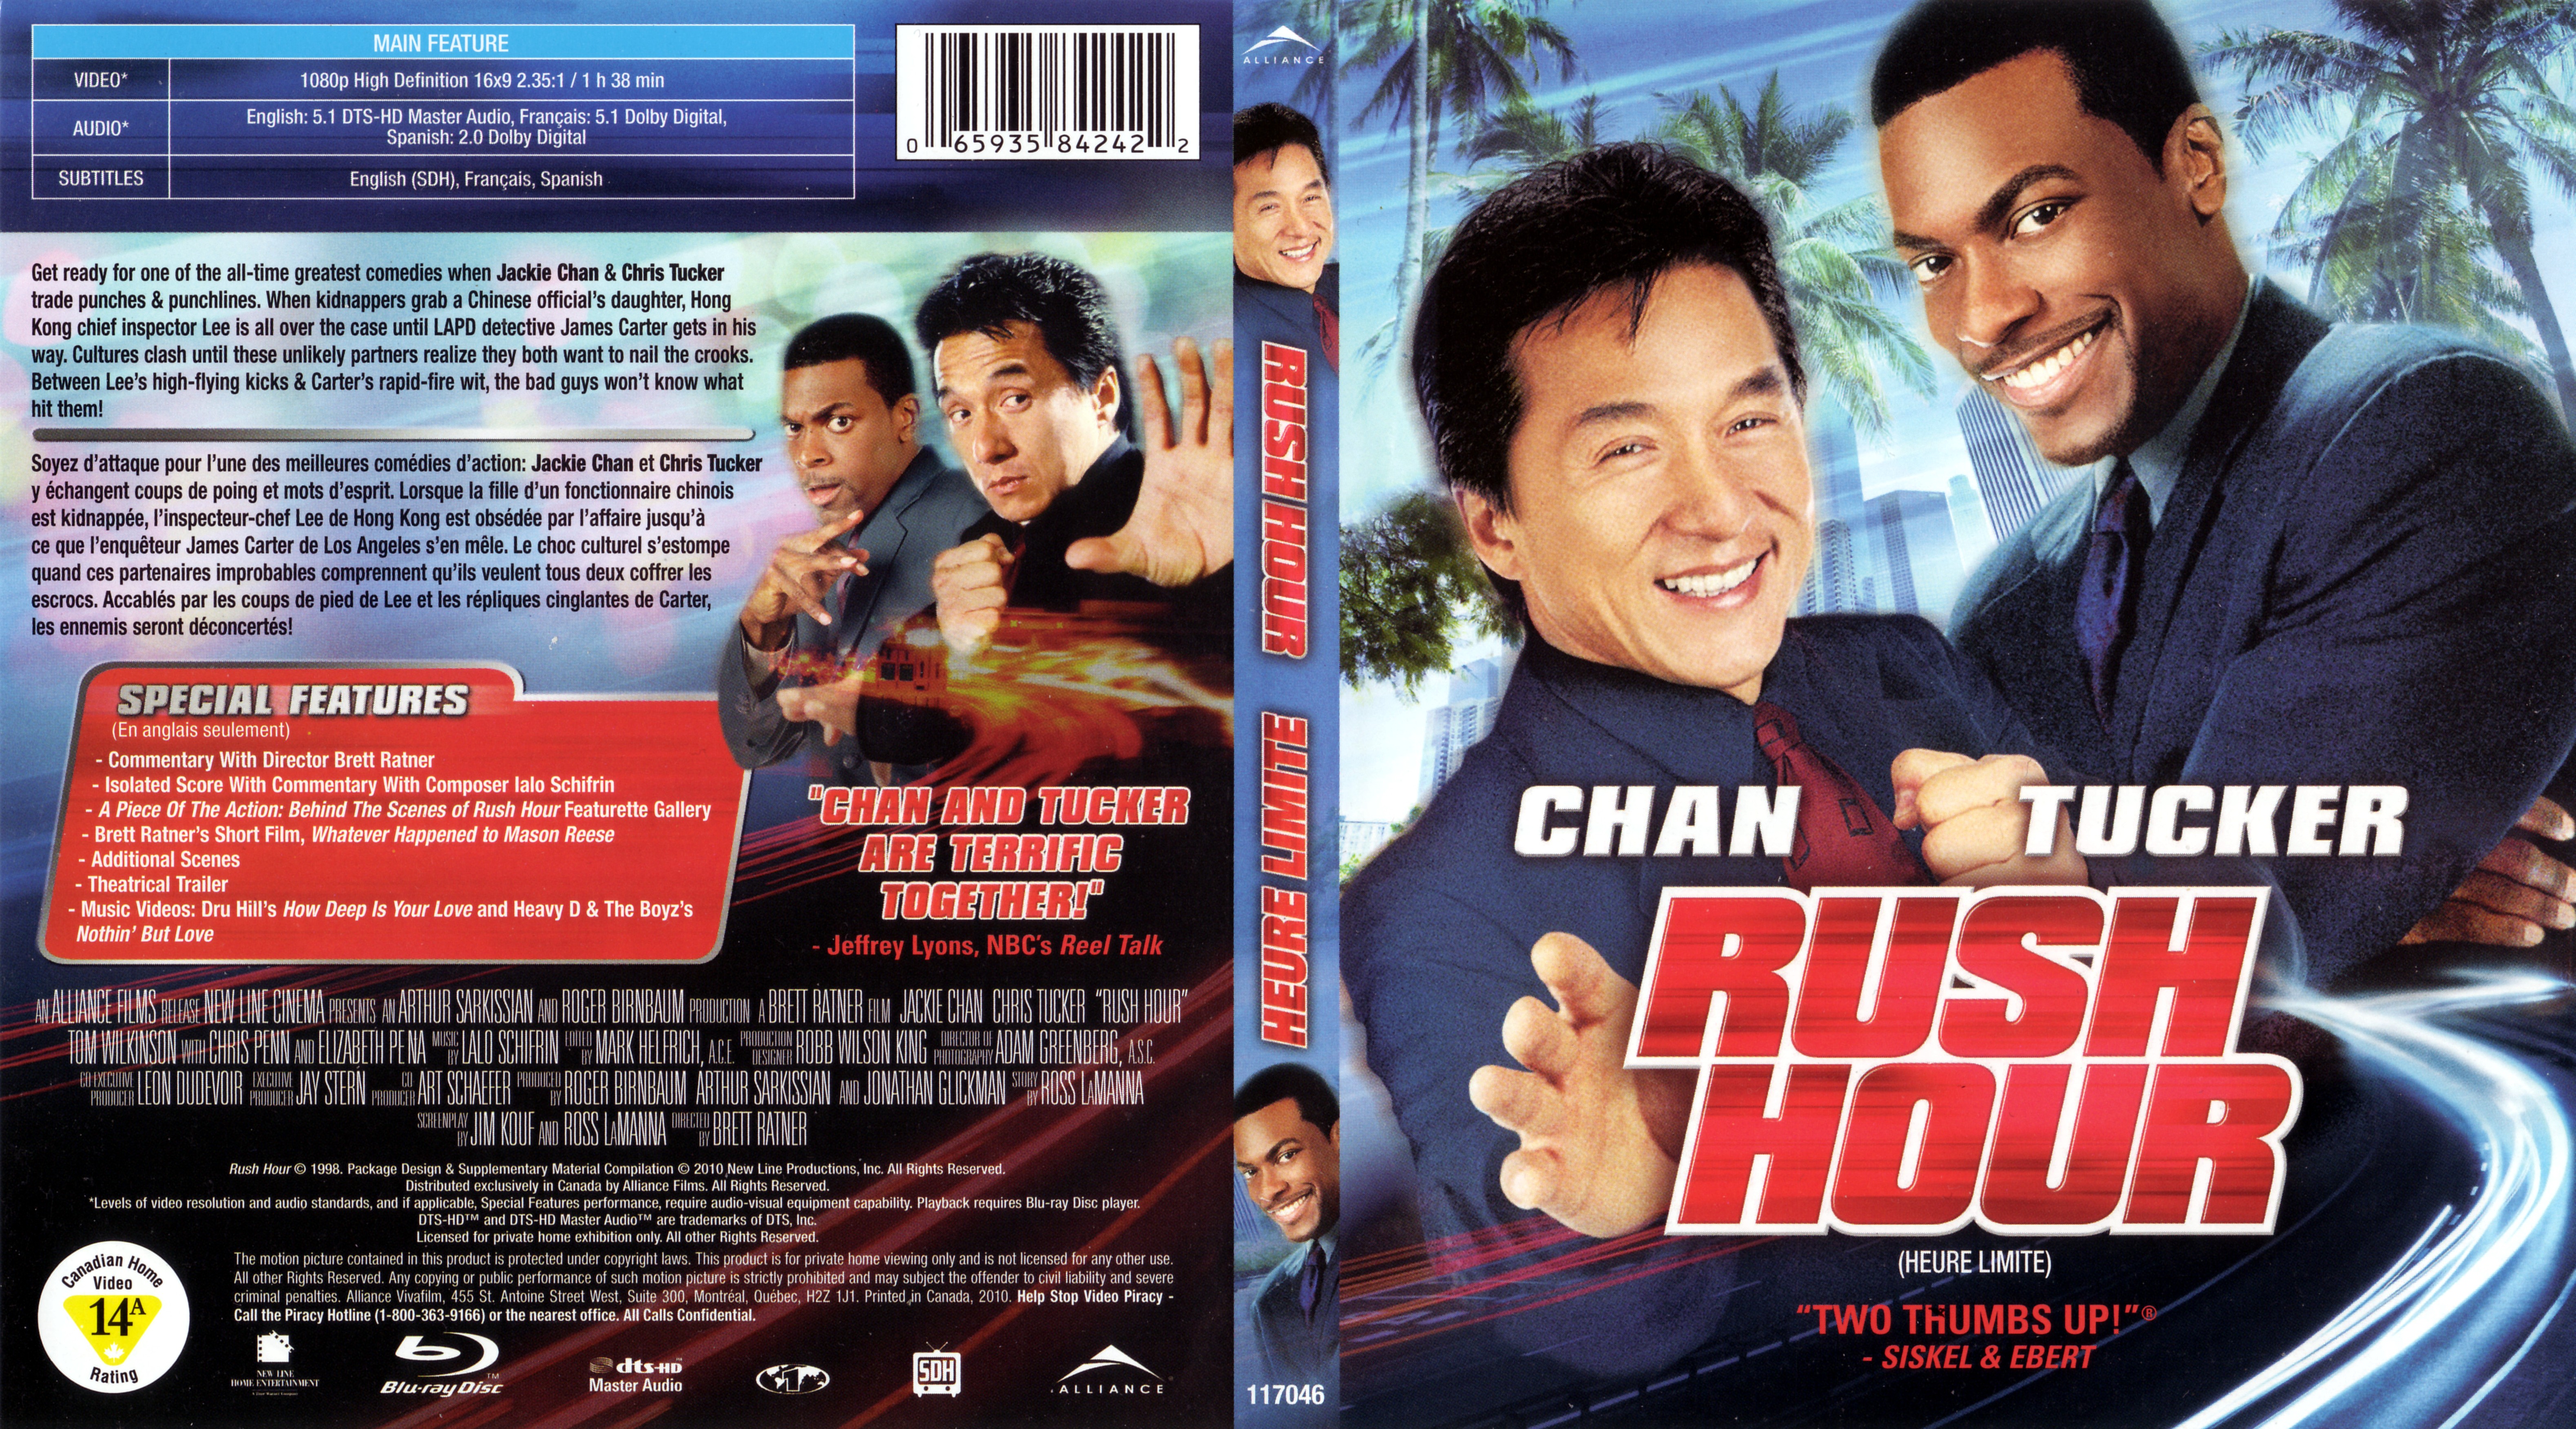 Jaquette DVD Heure limite - Rush hour (Canadienne) (BLU-RAY)